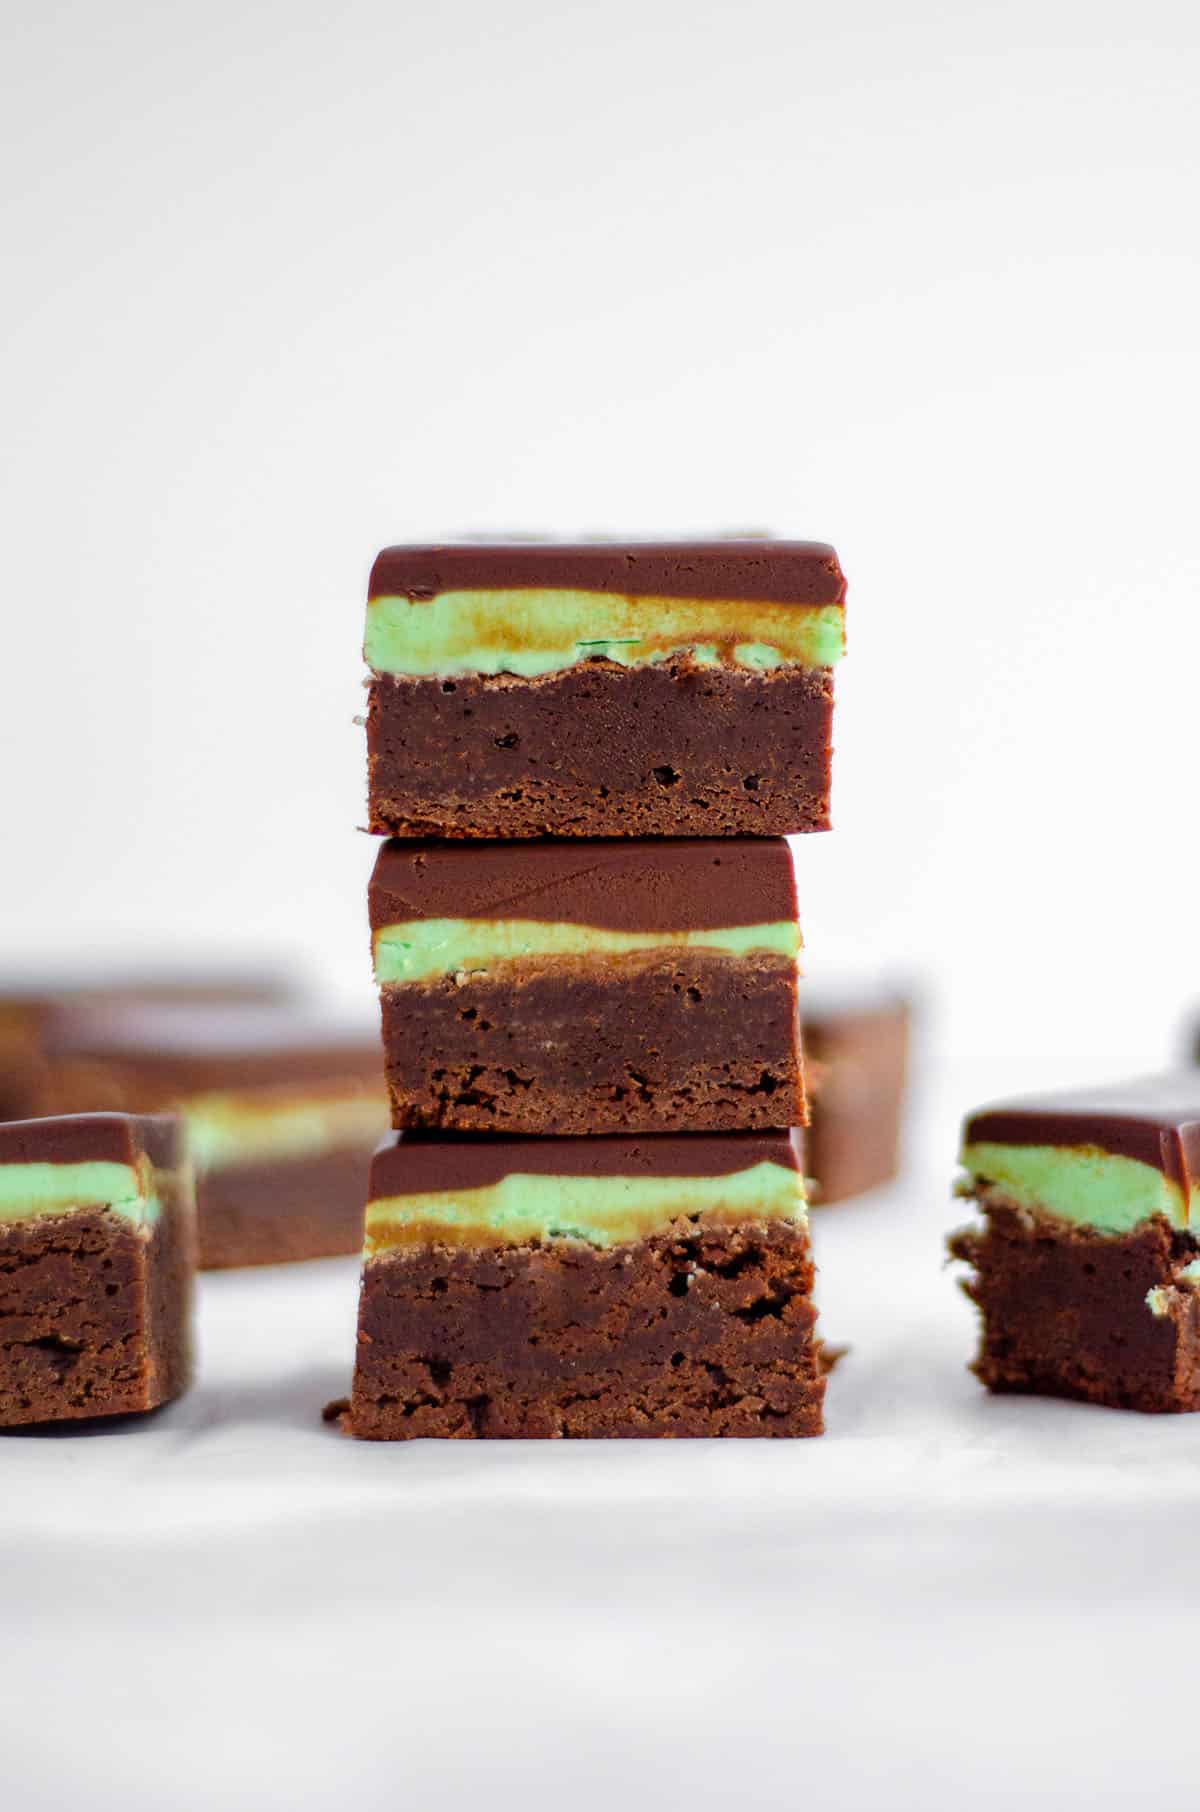 Mint Chocolate Brownies: These decadent mint chocolate brownies begin with a dense and fudgy brownie base that's topped with a creamy mint frosting and a layer of smooth chocolate ganache.